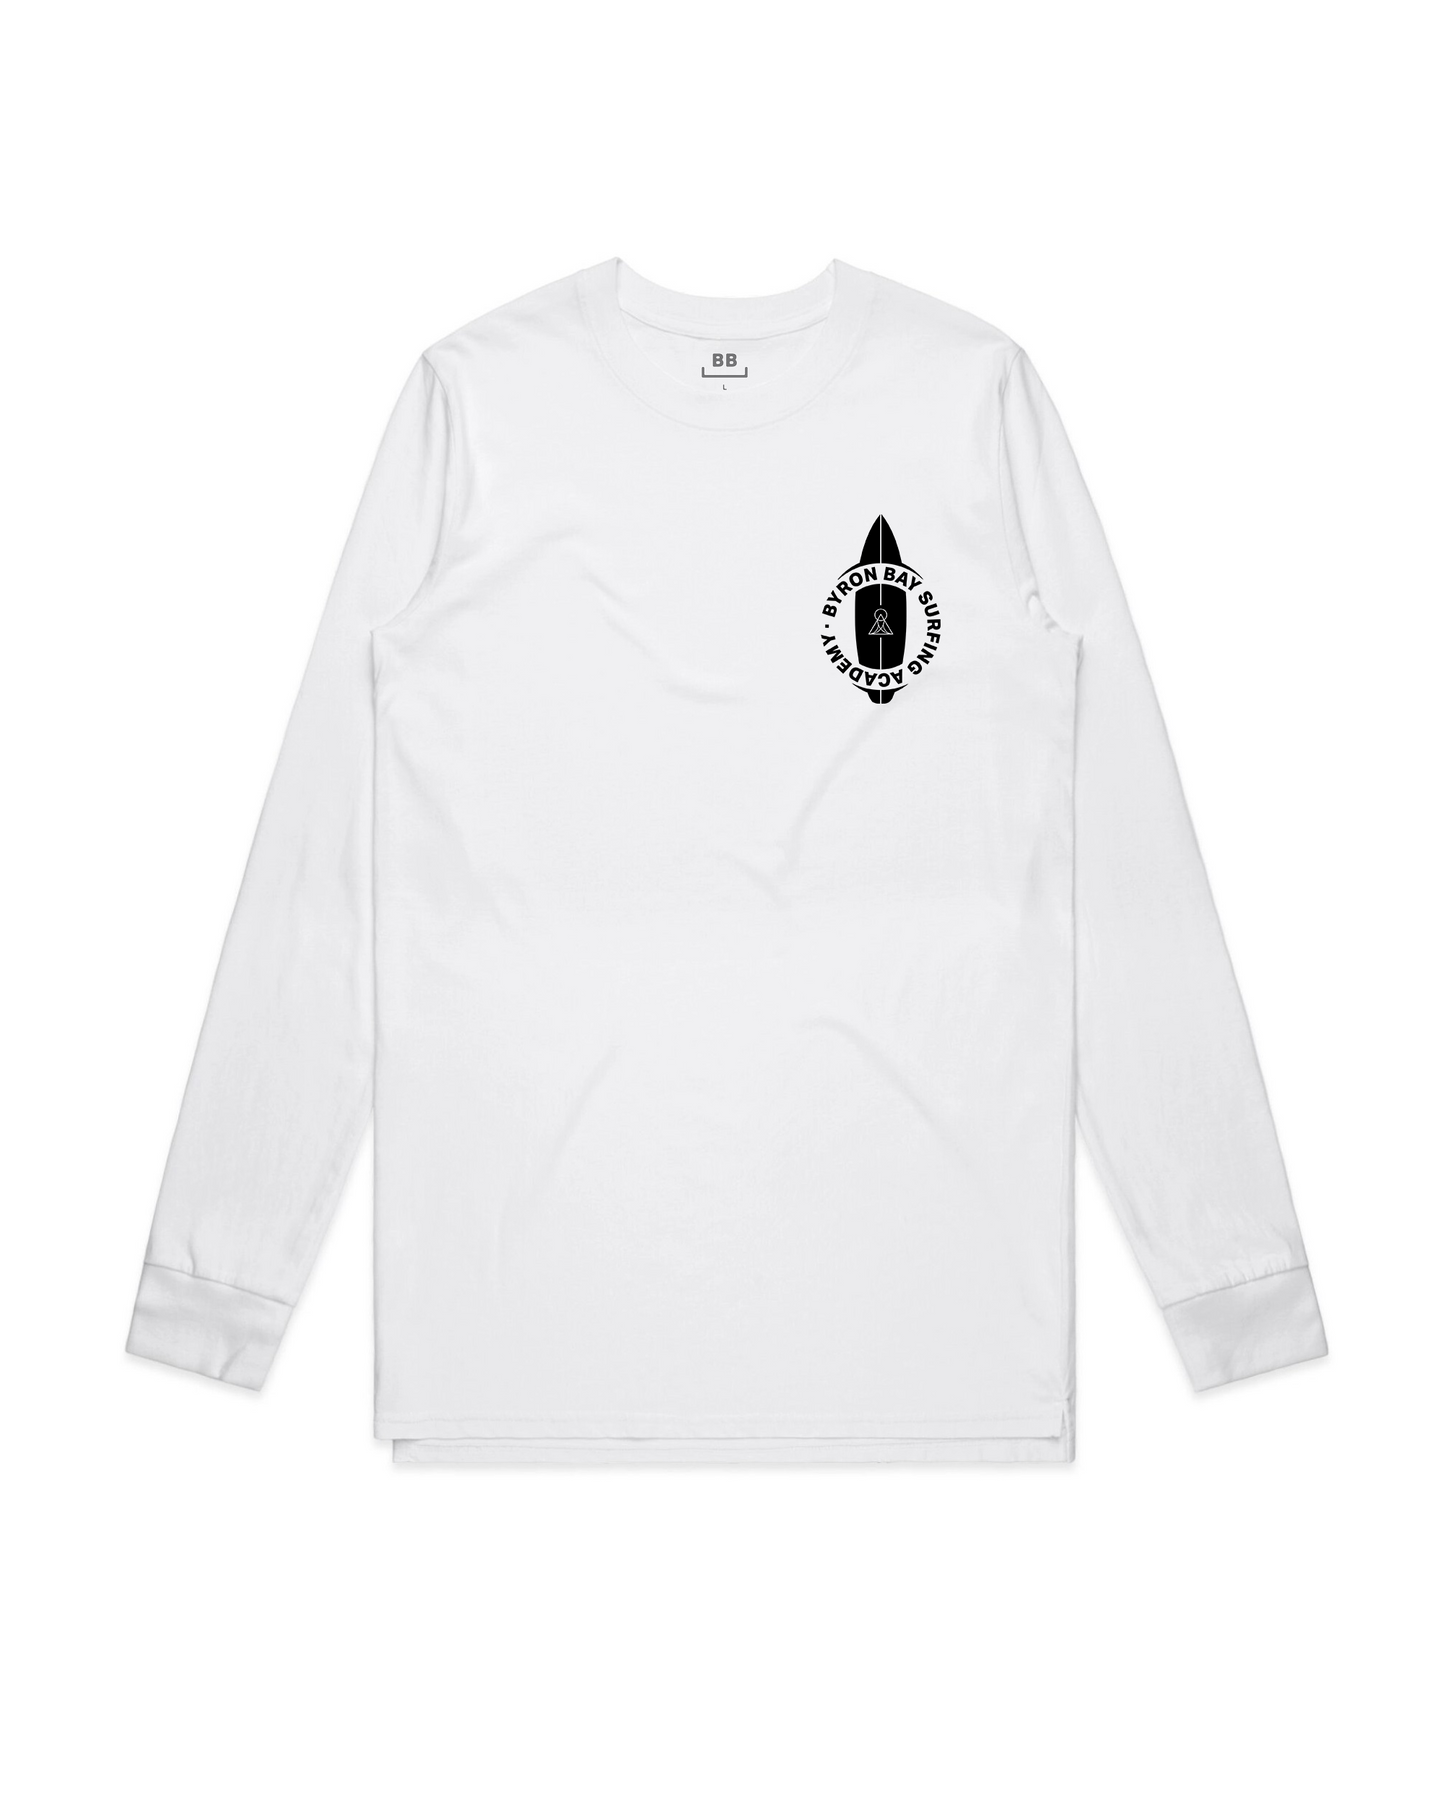 Byron Bay Surfing Academy 'Wave Surfer' L/S Tee